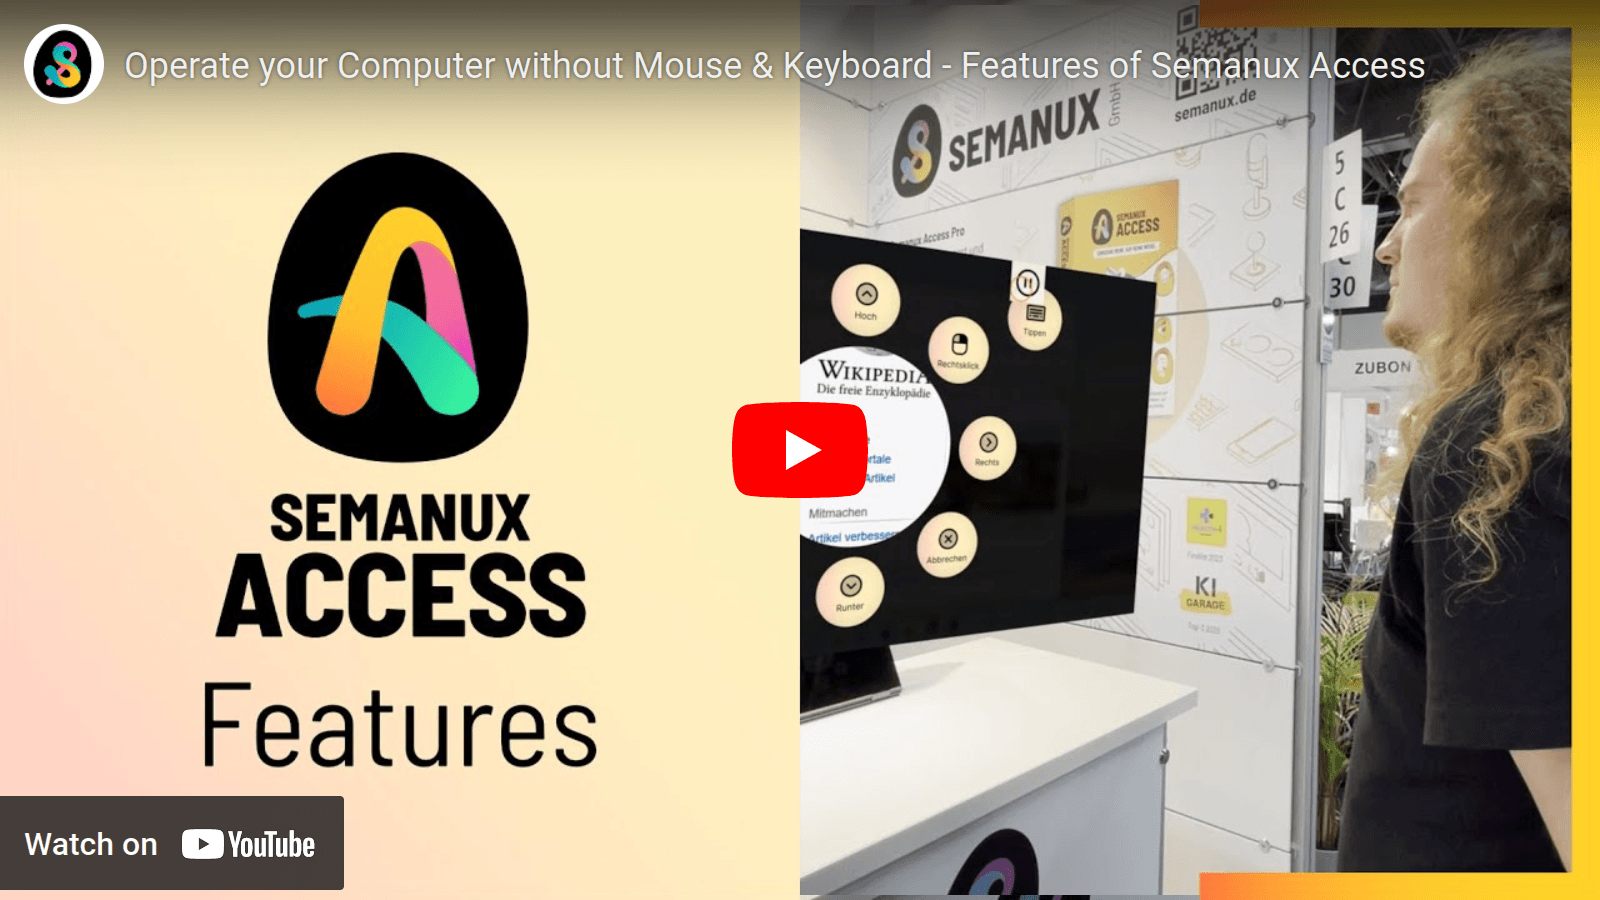 YouTube-Video “Operate your Computer without Mouse & Keyboard - Features of Semanux Access”